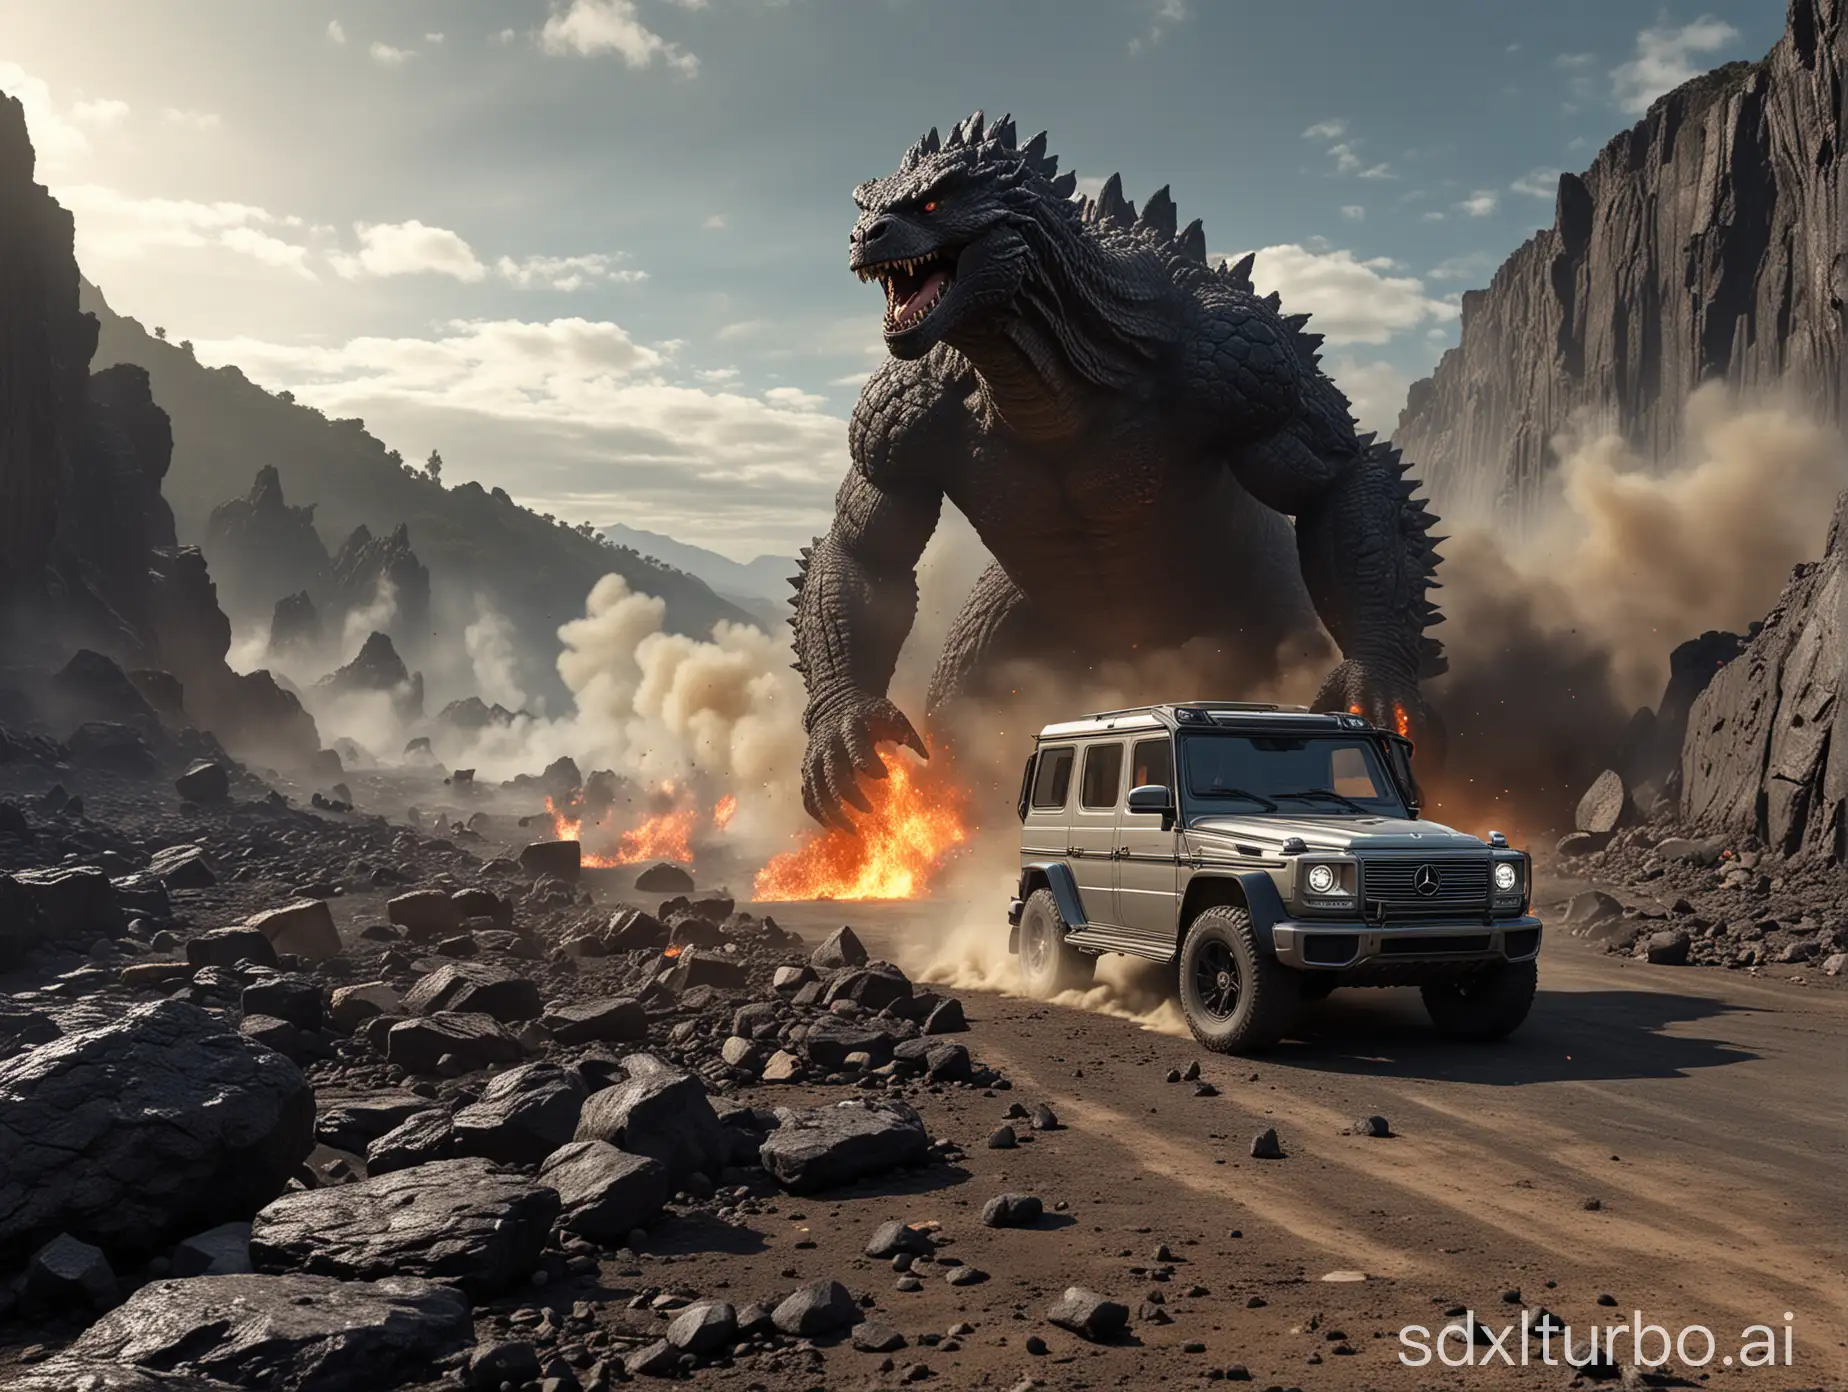 A volcanic eruption scene, Godzilla chasing the future Mercedes-Benz G in the distance. Referring to "Clash of the Titans", the future Mercedes-Benz G gallops forward, reflecting the pure front of the car, textured stones, ground cracks, lava spewing, rapid rotation of tires, low angle of view, sports atmosphere rendering, large scene, wide angle, Hollywood science fiction style